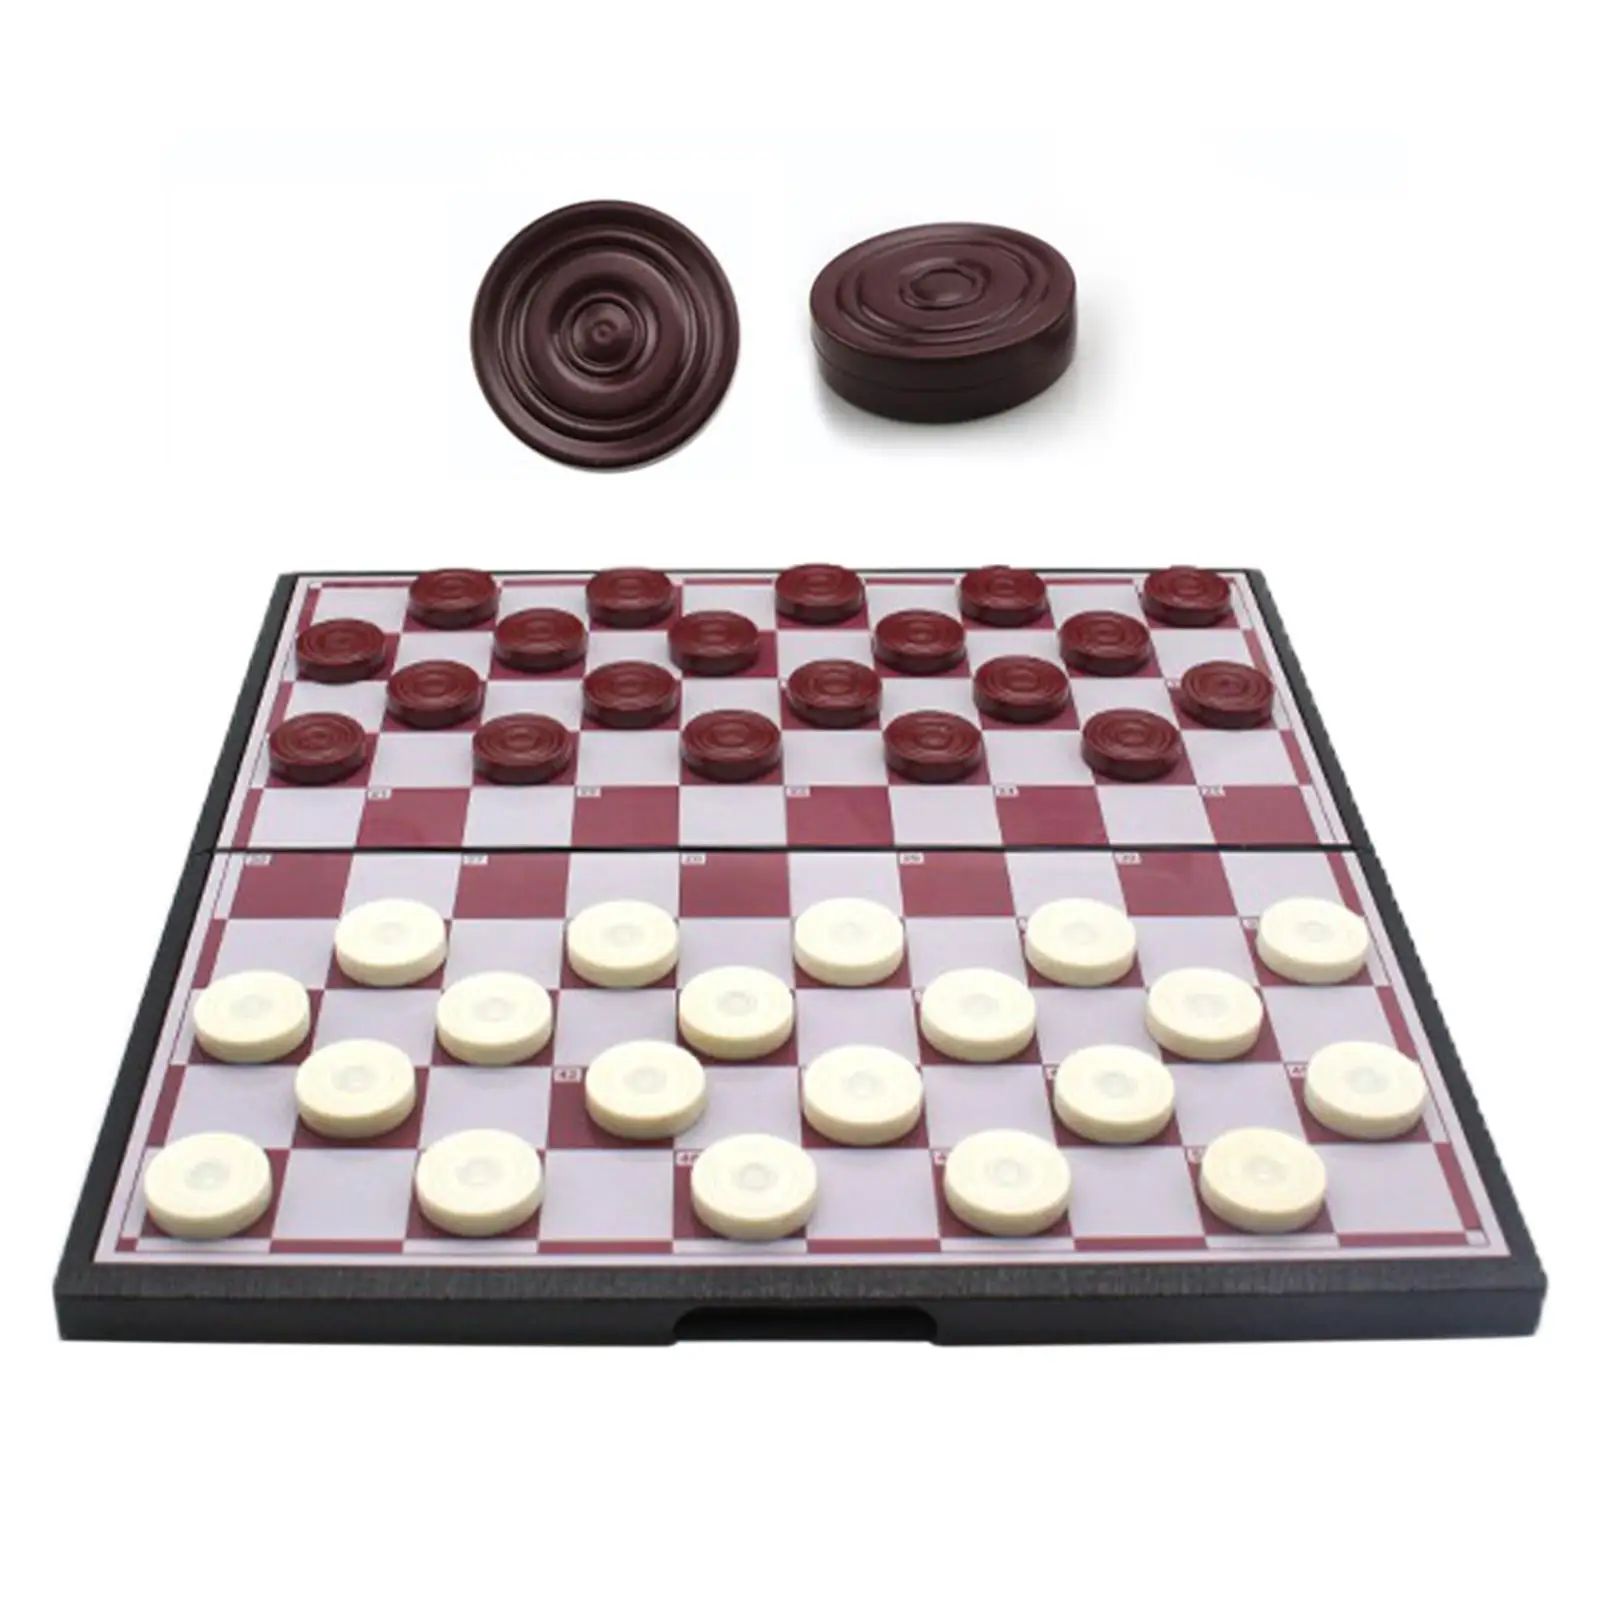  inch Magnetic Checkers Board Game Foldable Checkers Board for children fun